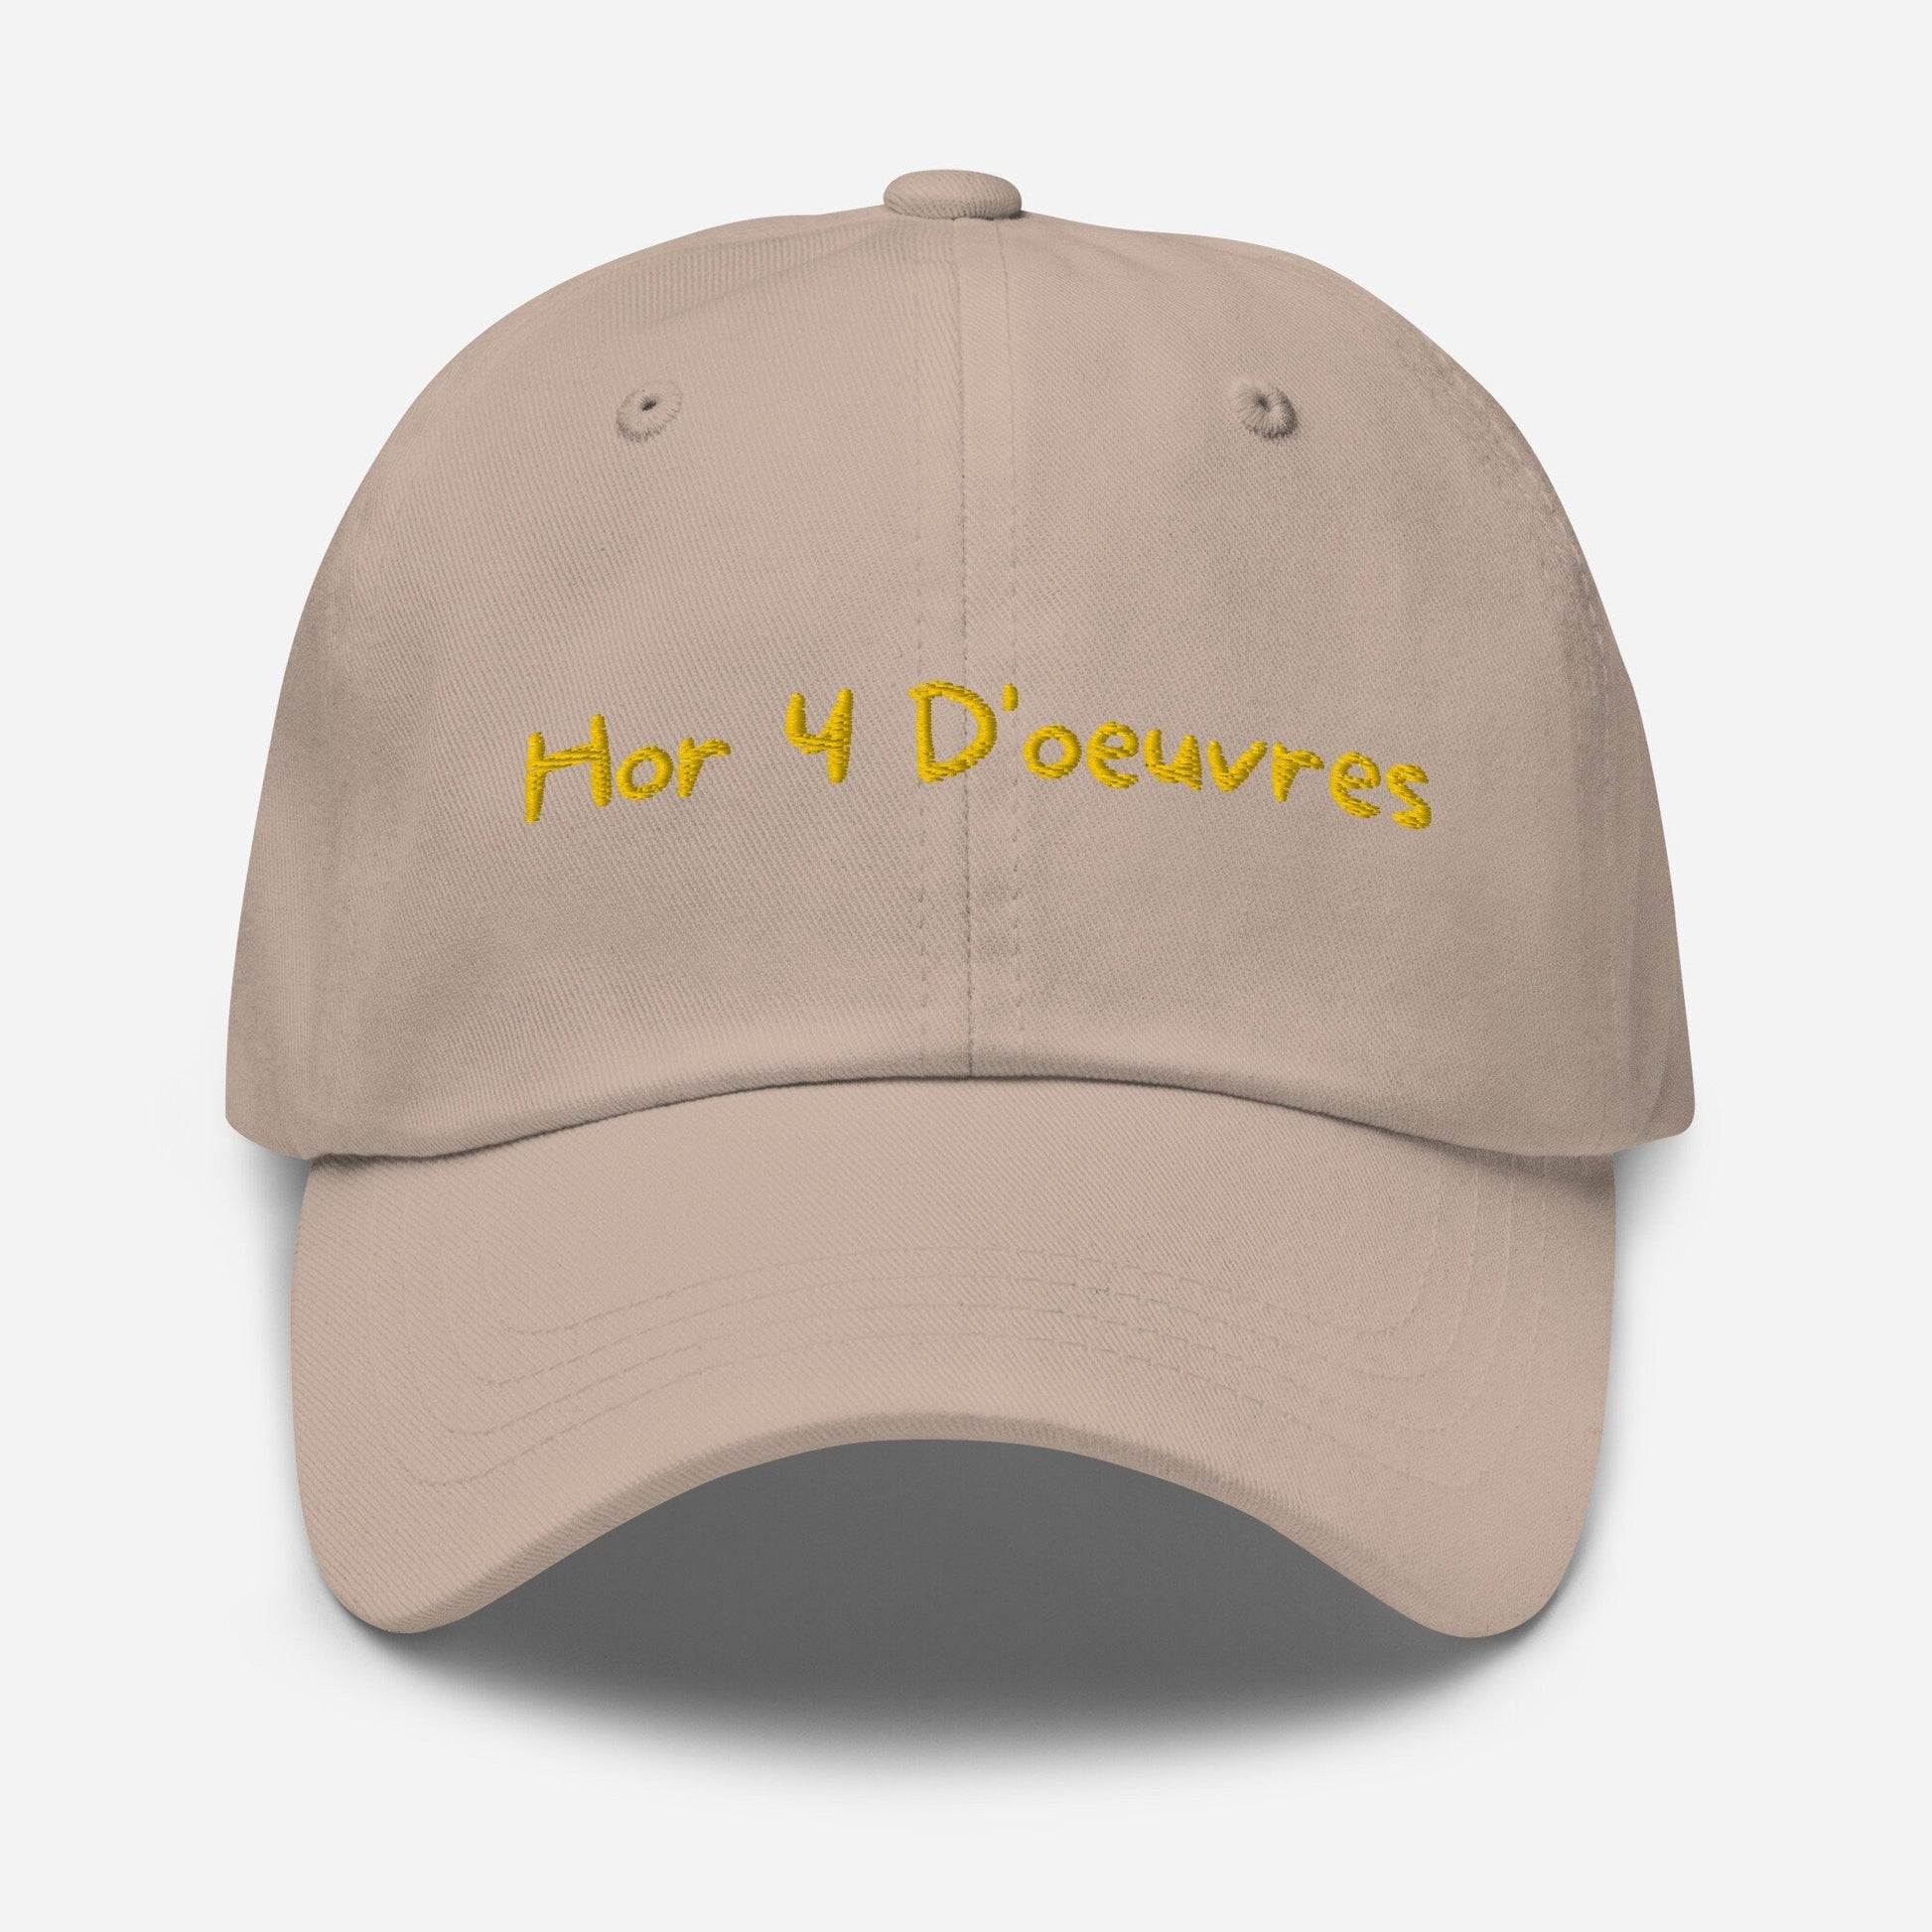 Hors d'oeuvre Dad Hat - Gift for food lovers and home chefs - Embroidered Cotton Cap - Evilwater Originals